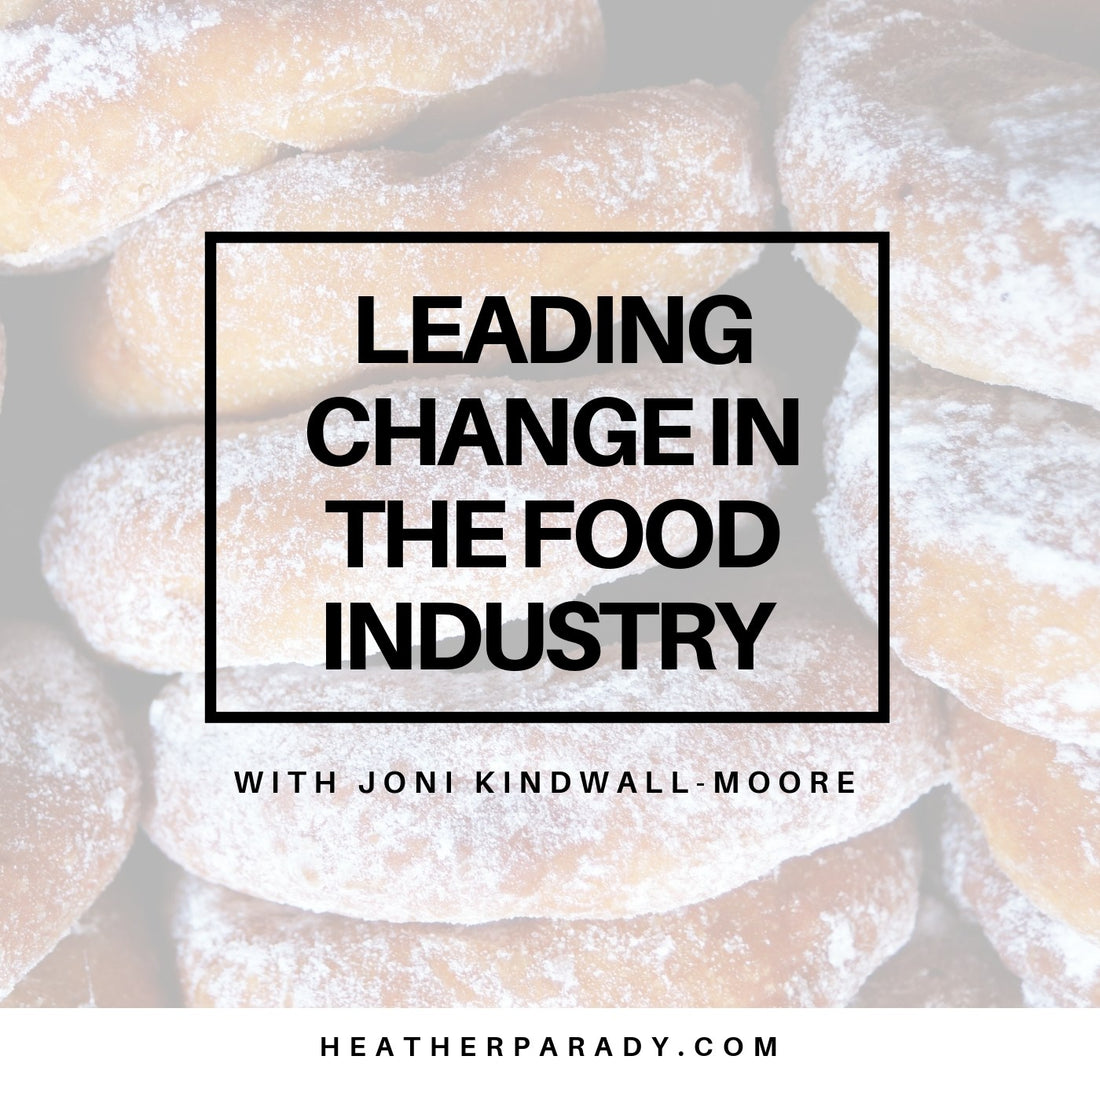 Listen to: Leading Change in the Food Industry with Joni Kindwall-Moore